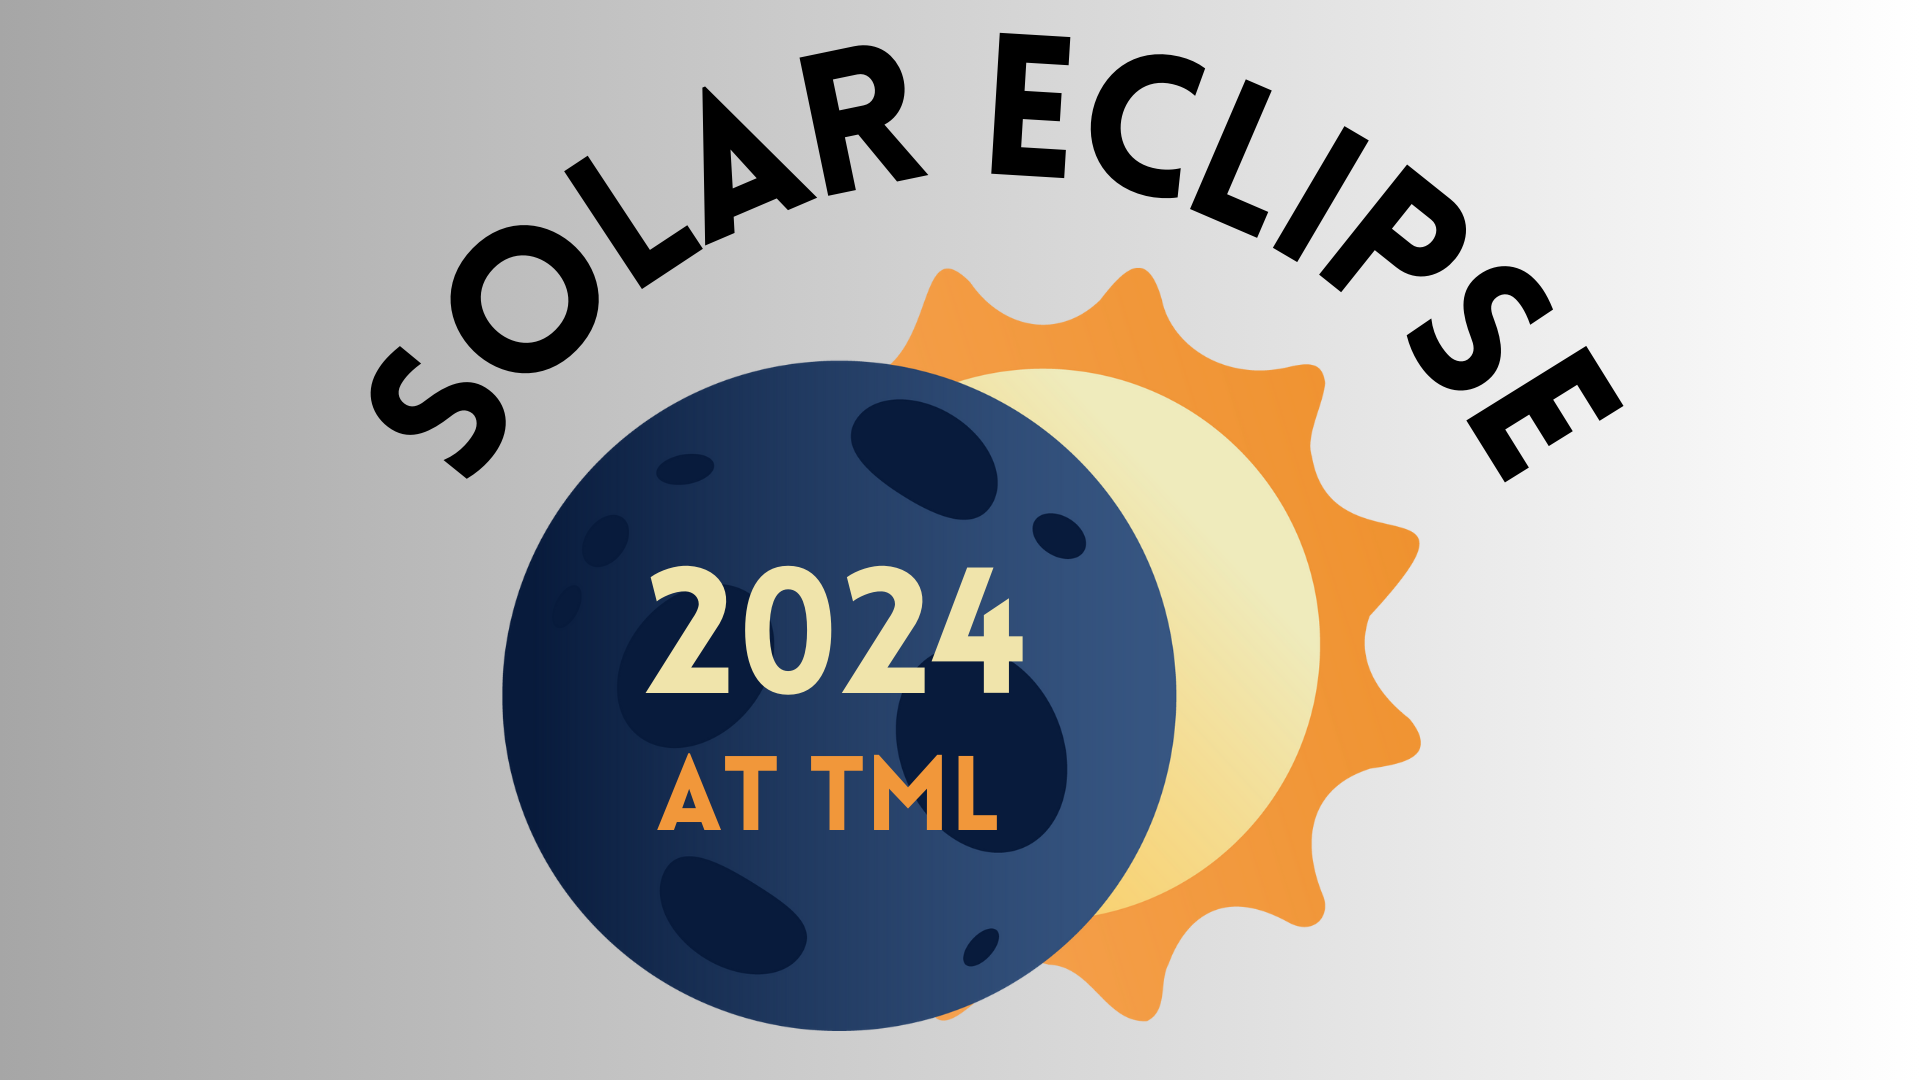 solar eclipse 2024 at TML, image of moon in front of the sun